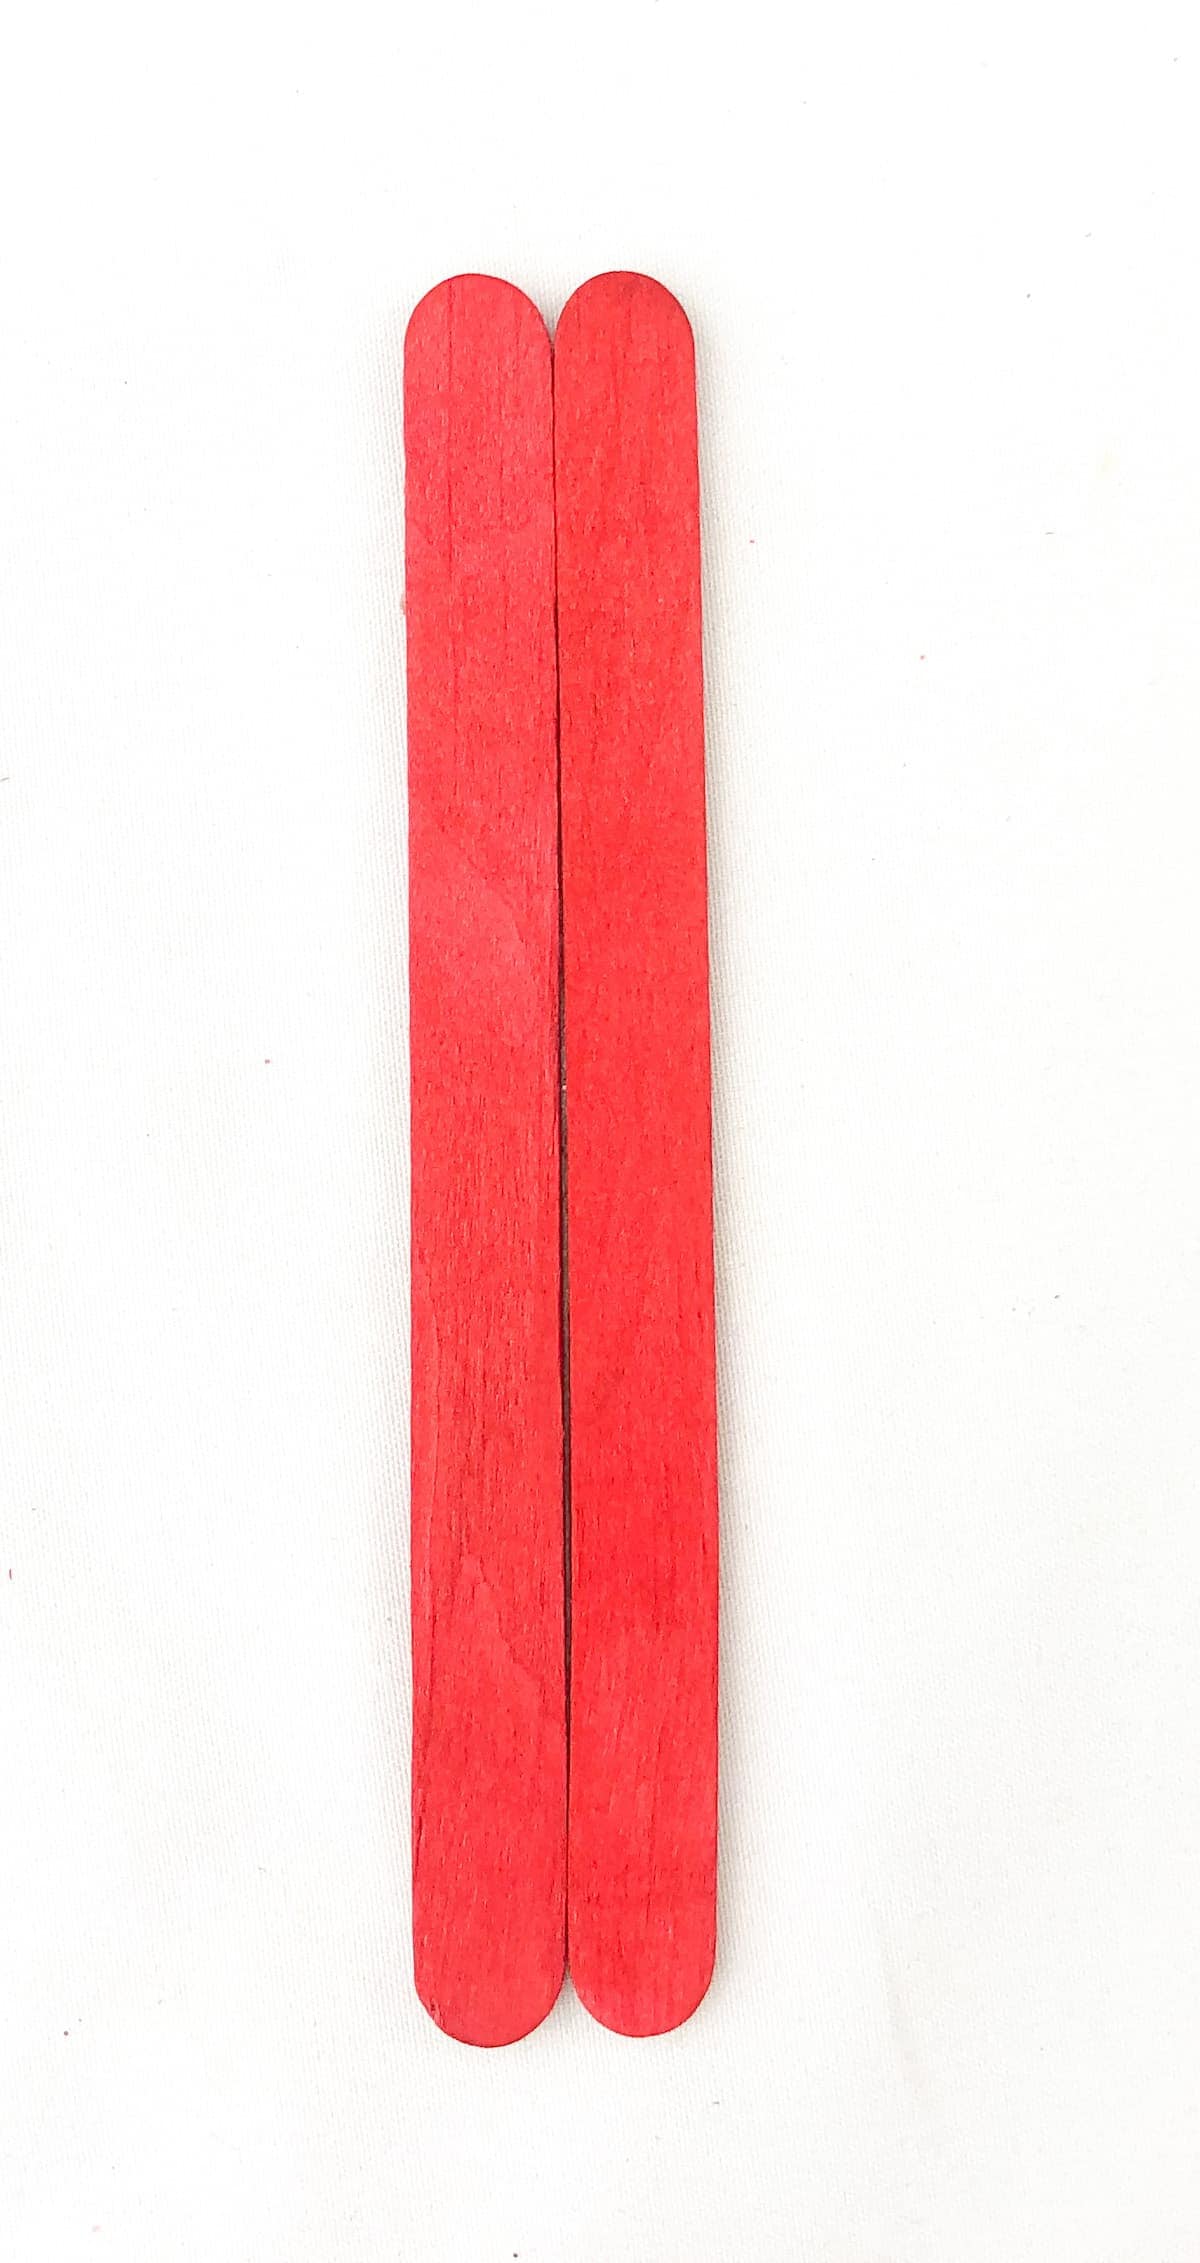 Popsicle Stick Valentine Crafts: 5 Simple and Sweet Ideas